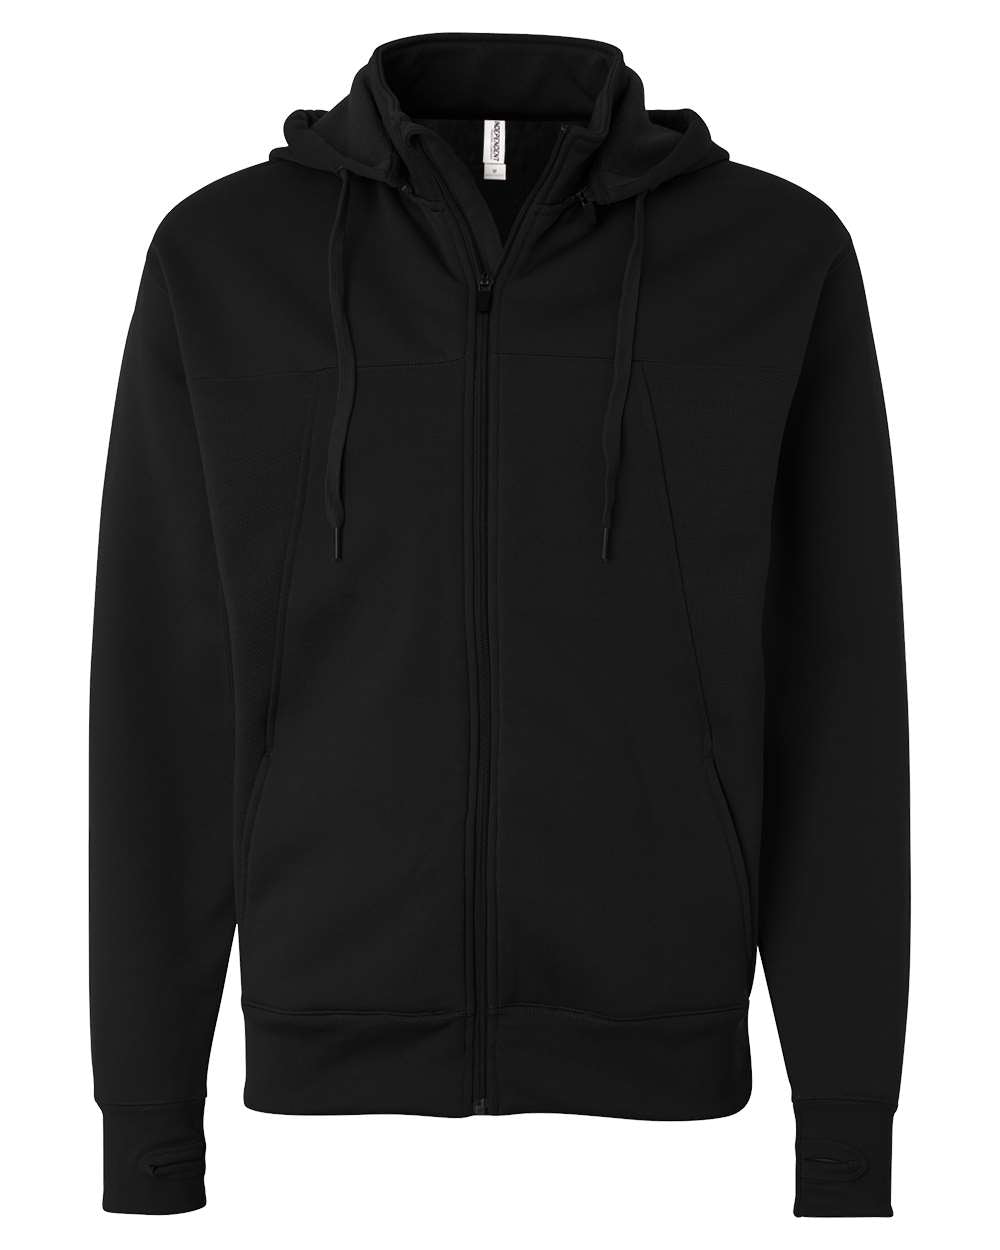 Independent Trading Co. - Poly-Tech Full-Zip Hooded Sweatshirt